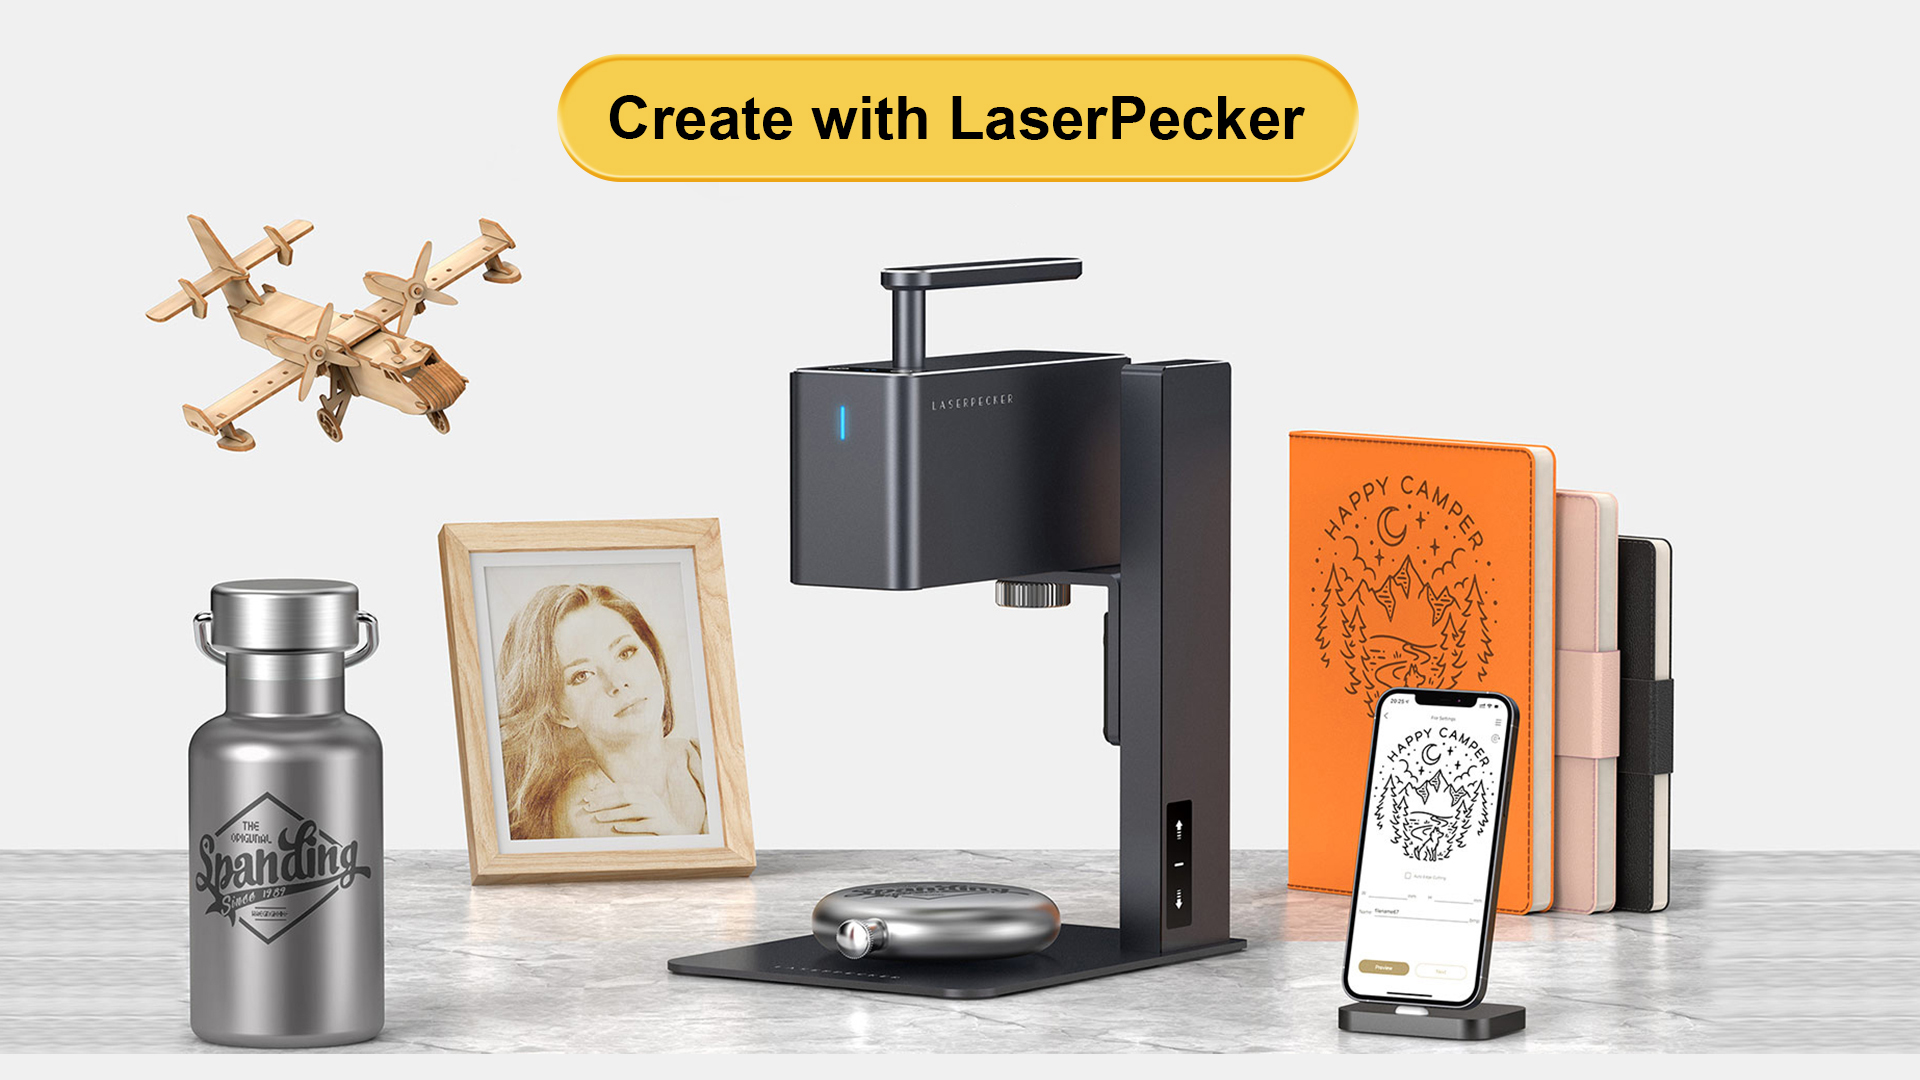 LaserPecker 2 Pro Handheld Laser Engraver & Cutter with Auxiliary Booster - Pro Edition